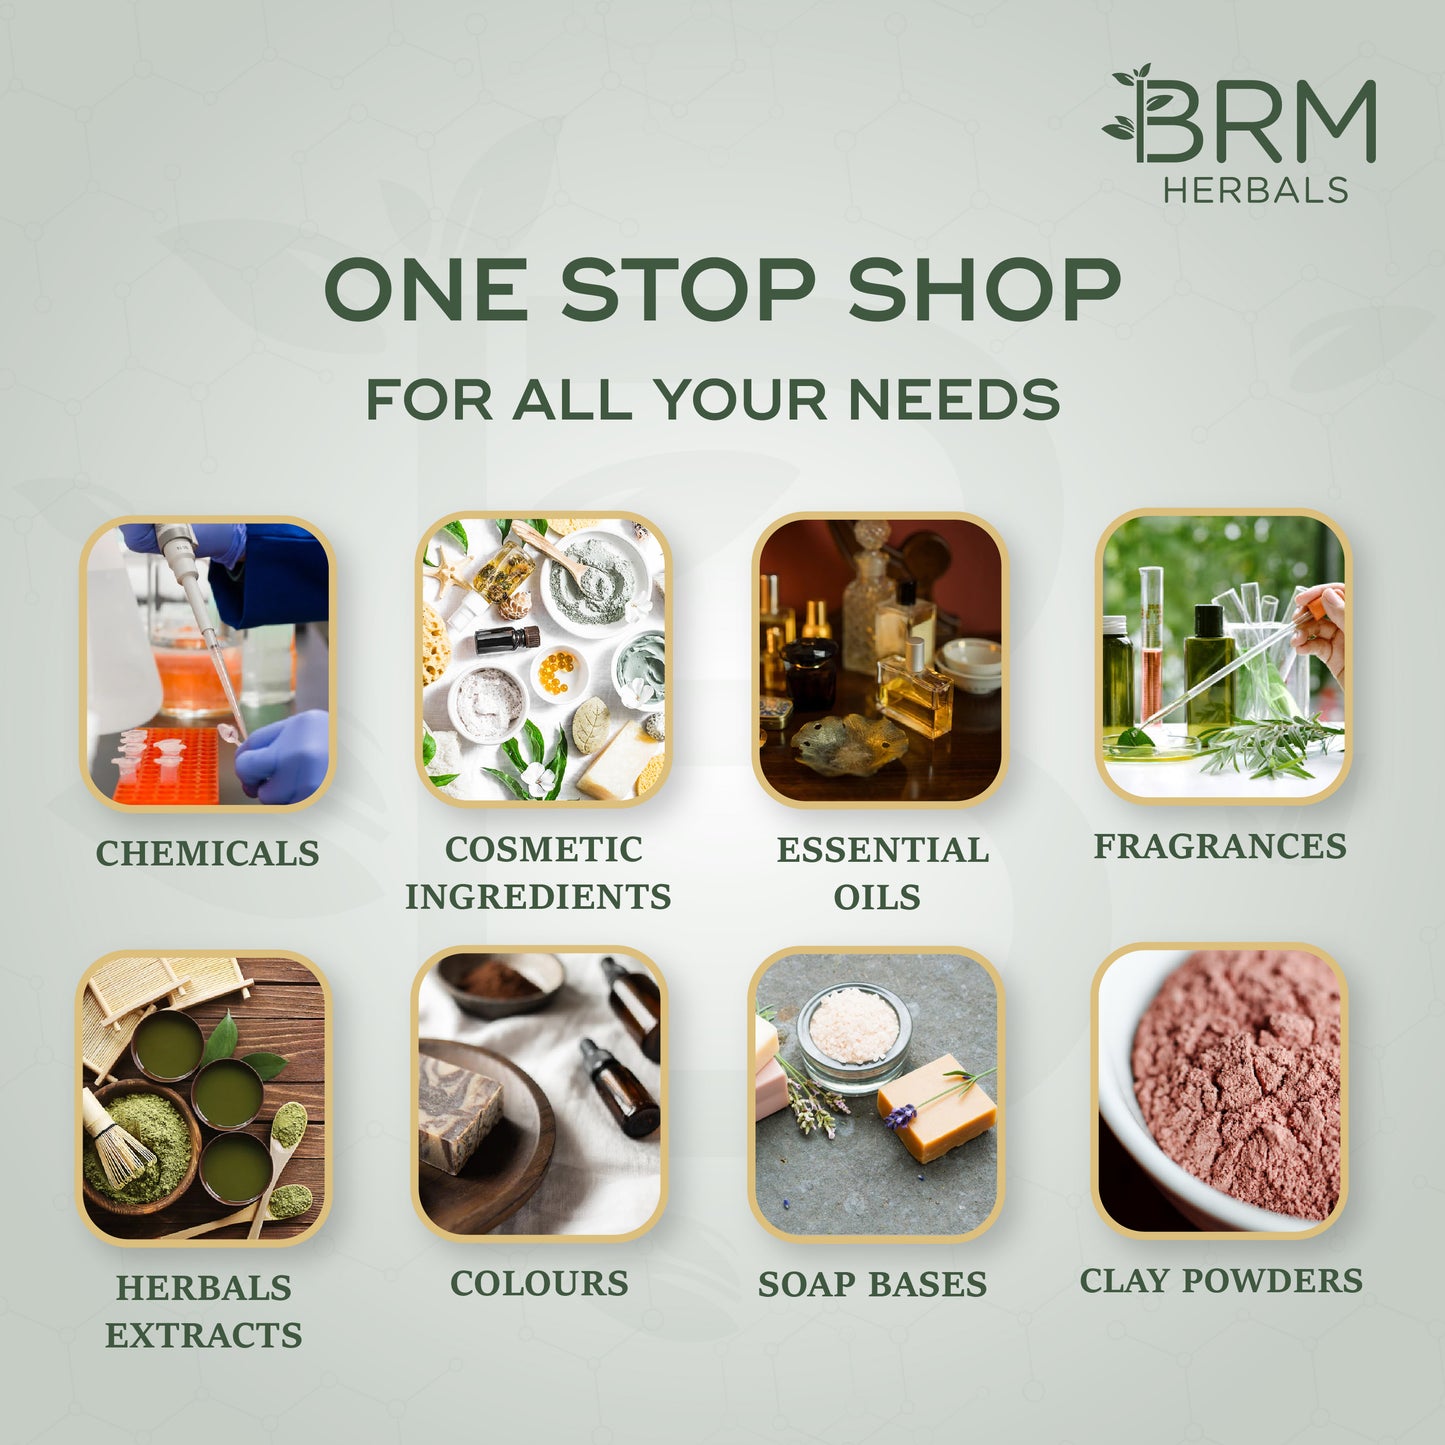 BRM Chemicals' banner for one stop store for chemicals, cosmetic ingredients, essential oils, fragrances, herbals extracts, colours, soap bases, clay powders